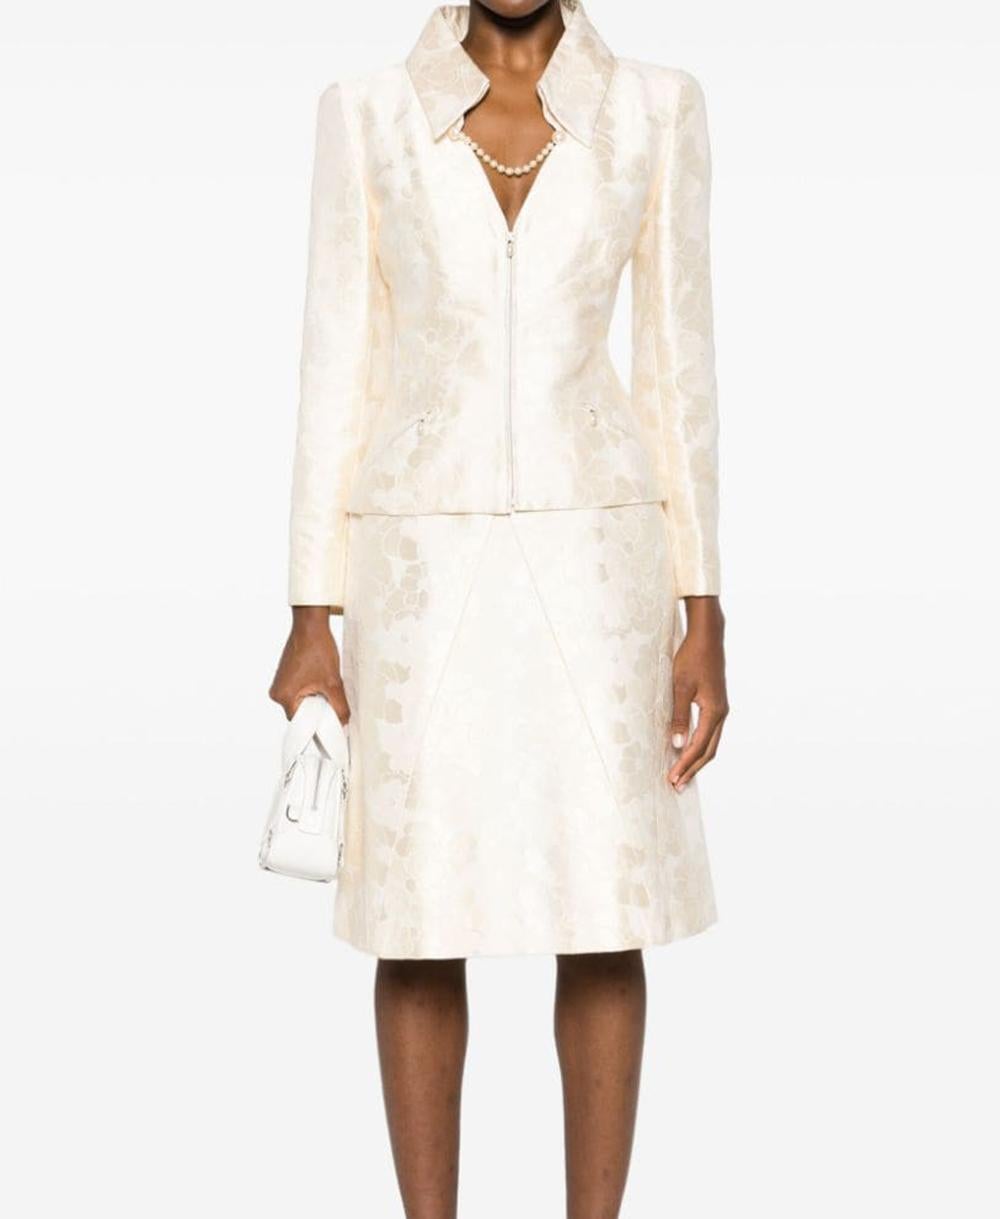 Chanel light ivory camellia pattern two-piece skirt suit featuring a cotton-silk blend fabric, a signature Camélia motive, faux-pearl embellishment.
For the jacket featuring a classic collar, a V-neck, a front two-way zip fastening, long sleeves,